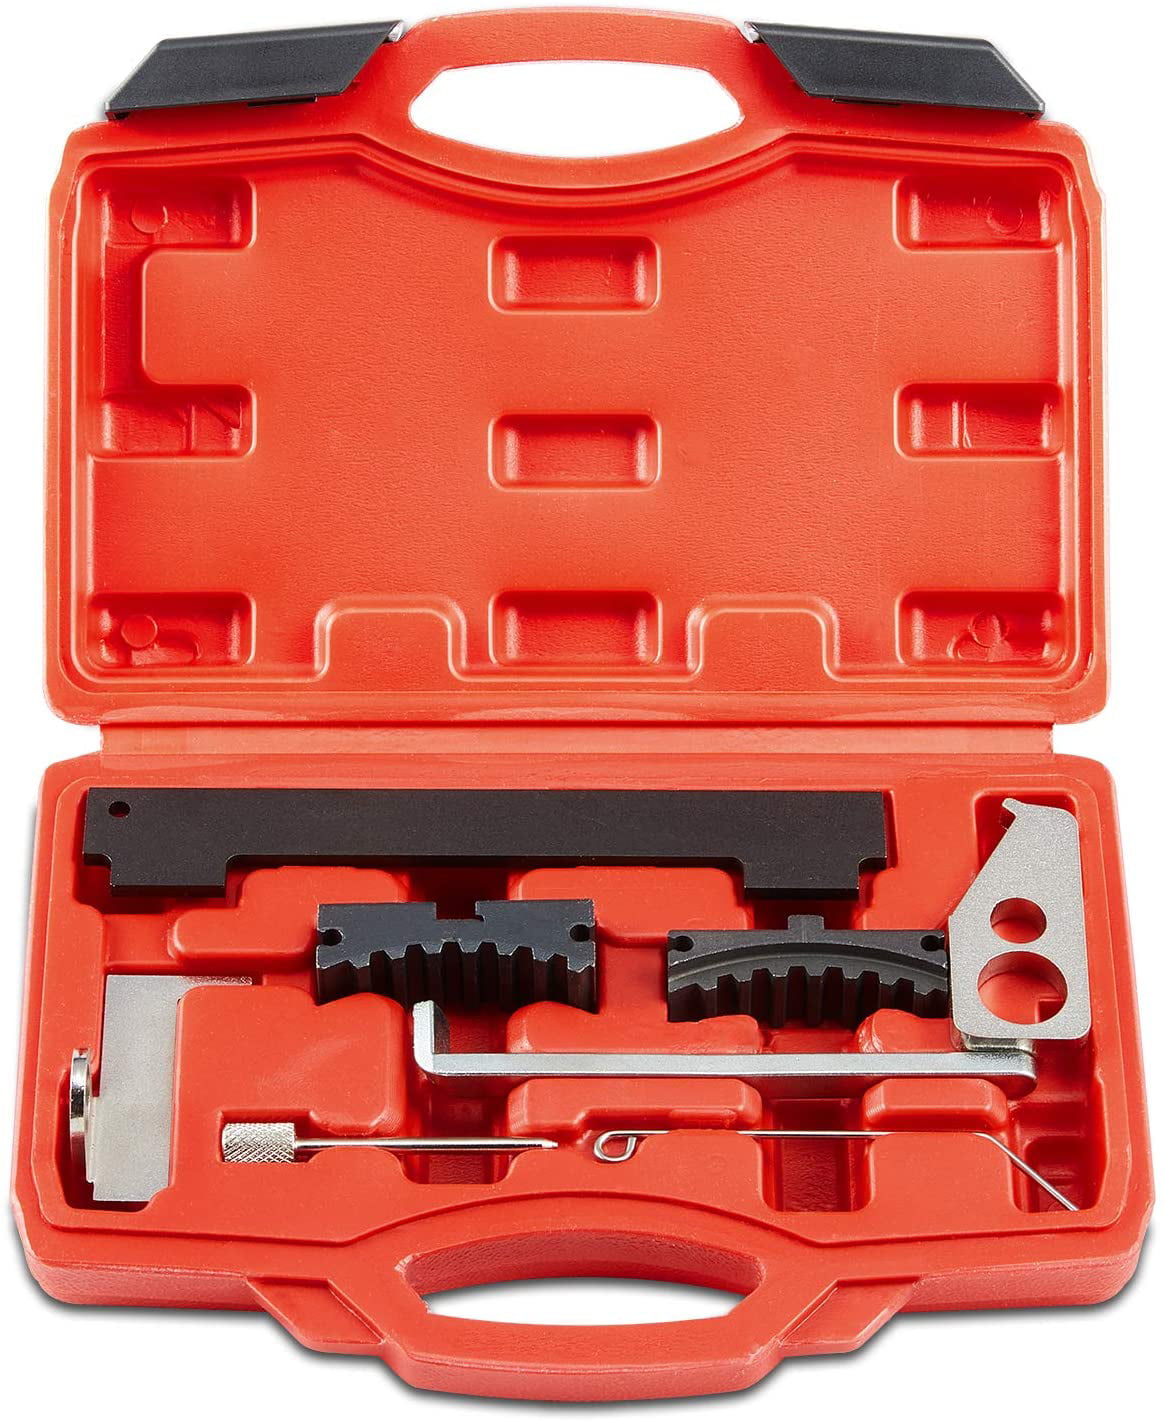 Details about   Camshaft Engine Alignment Locking Timing Tool for Chevrolet Cruze Opel Buick 